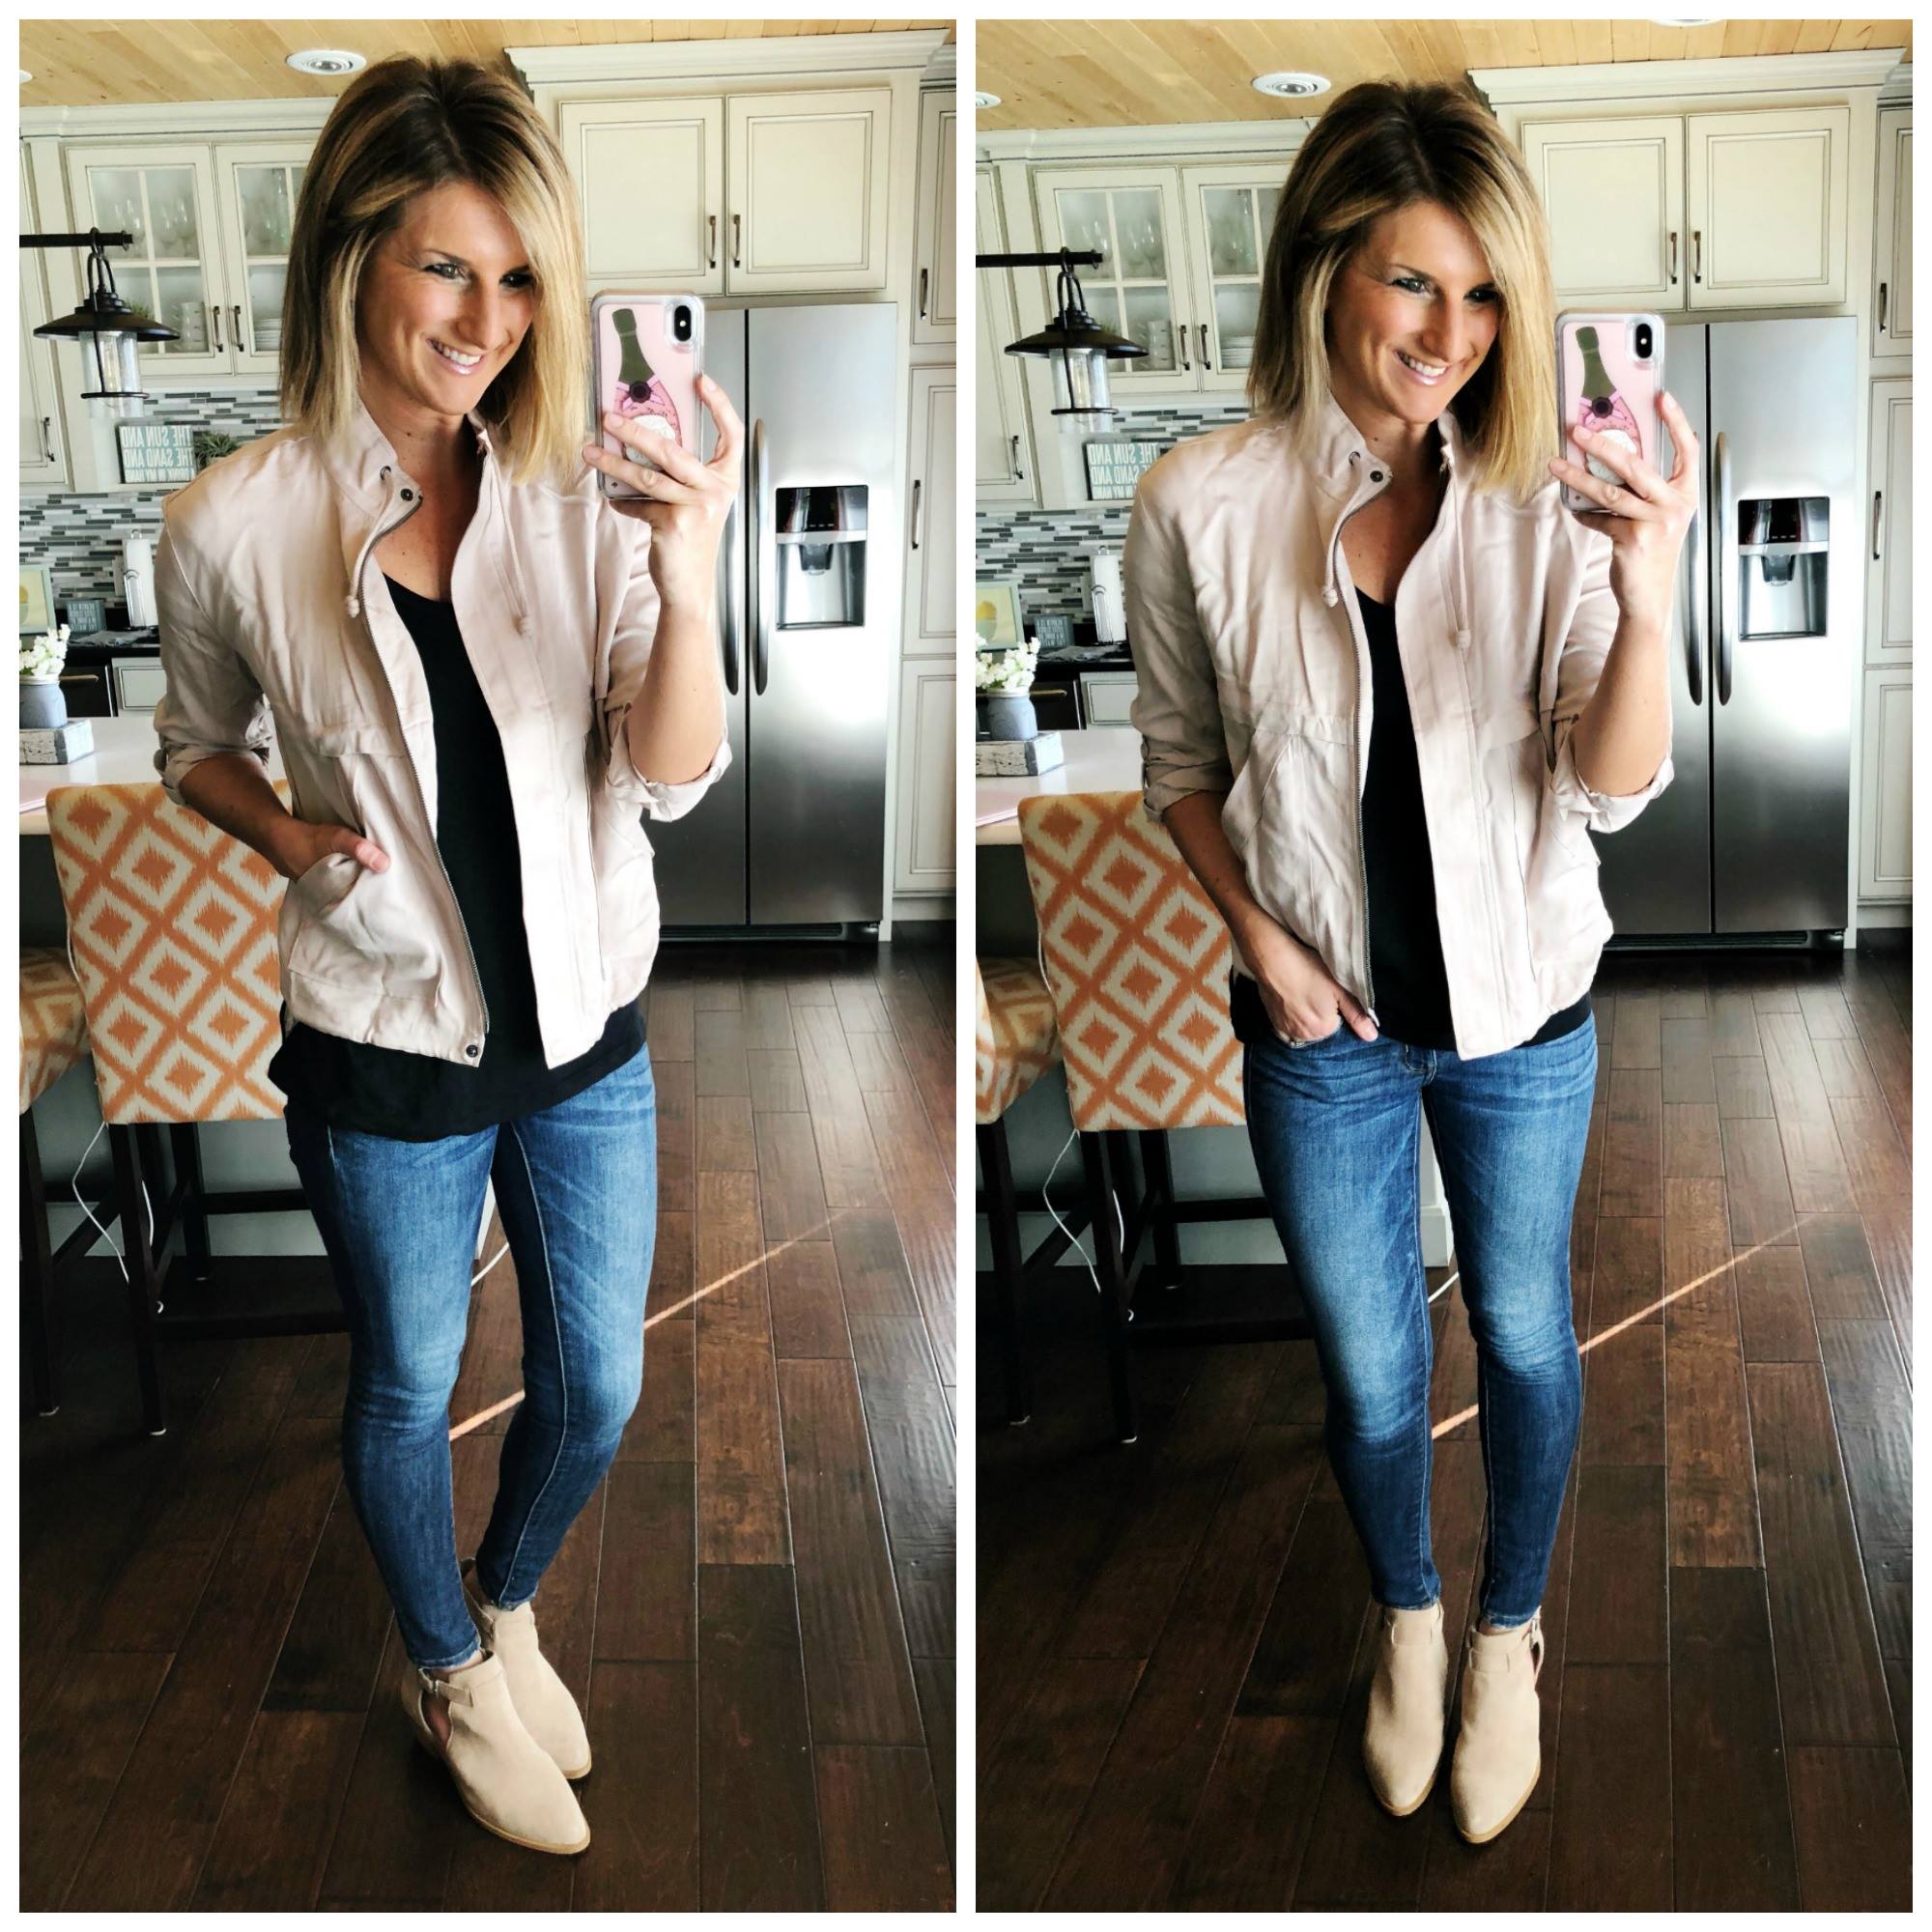 V Neck Tee + Jeggings + Blush Jacket + Spring Booties // Spring Layers